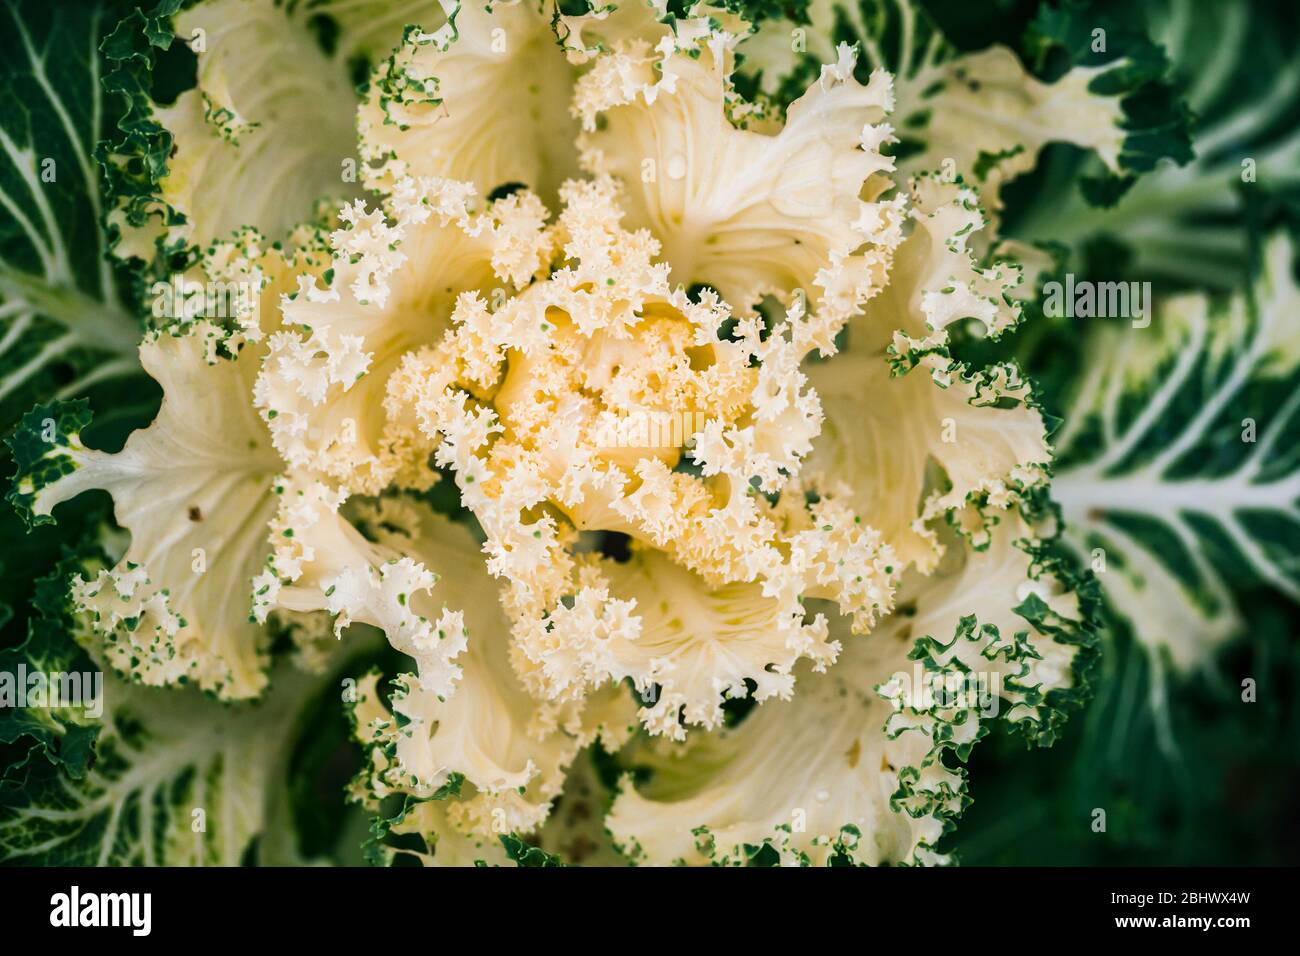 Decorative yellow green cabbage leaves, close-up photo with soft selective focus Stock Photo